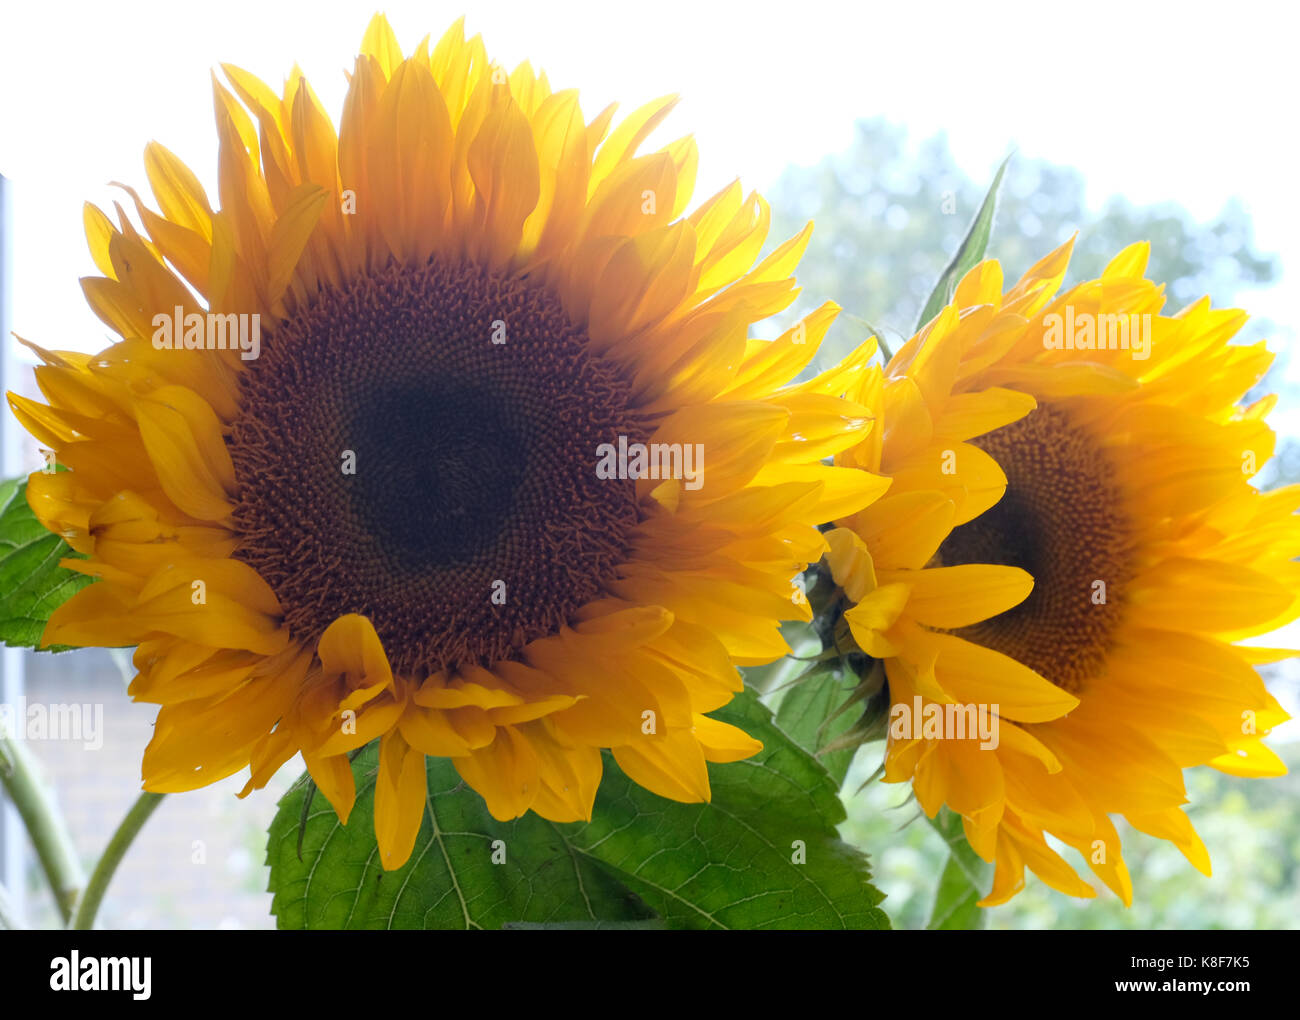 two sunflowers photographed in sturry kent uk september 2017 Stock Photo